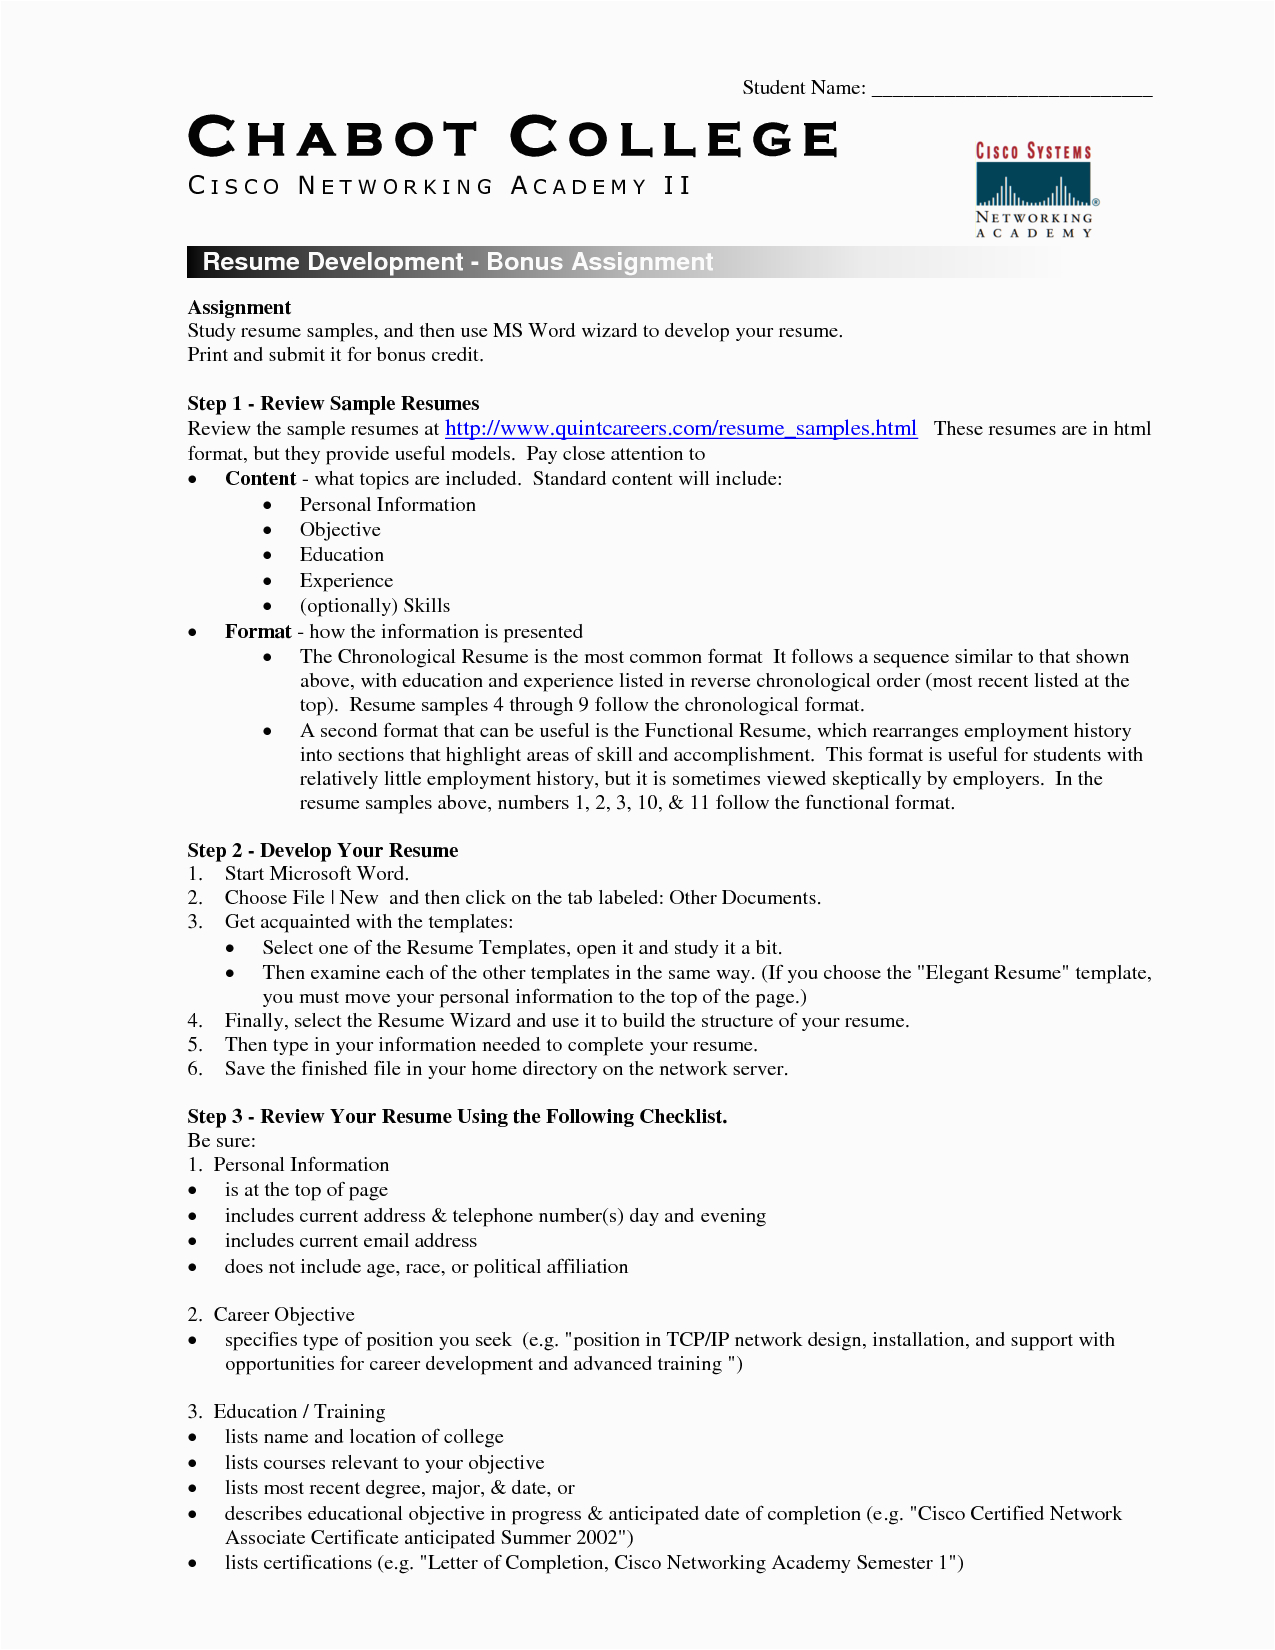 Resume Templates for College Students Free College Student Resume Template Microsoft Word – Task List